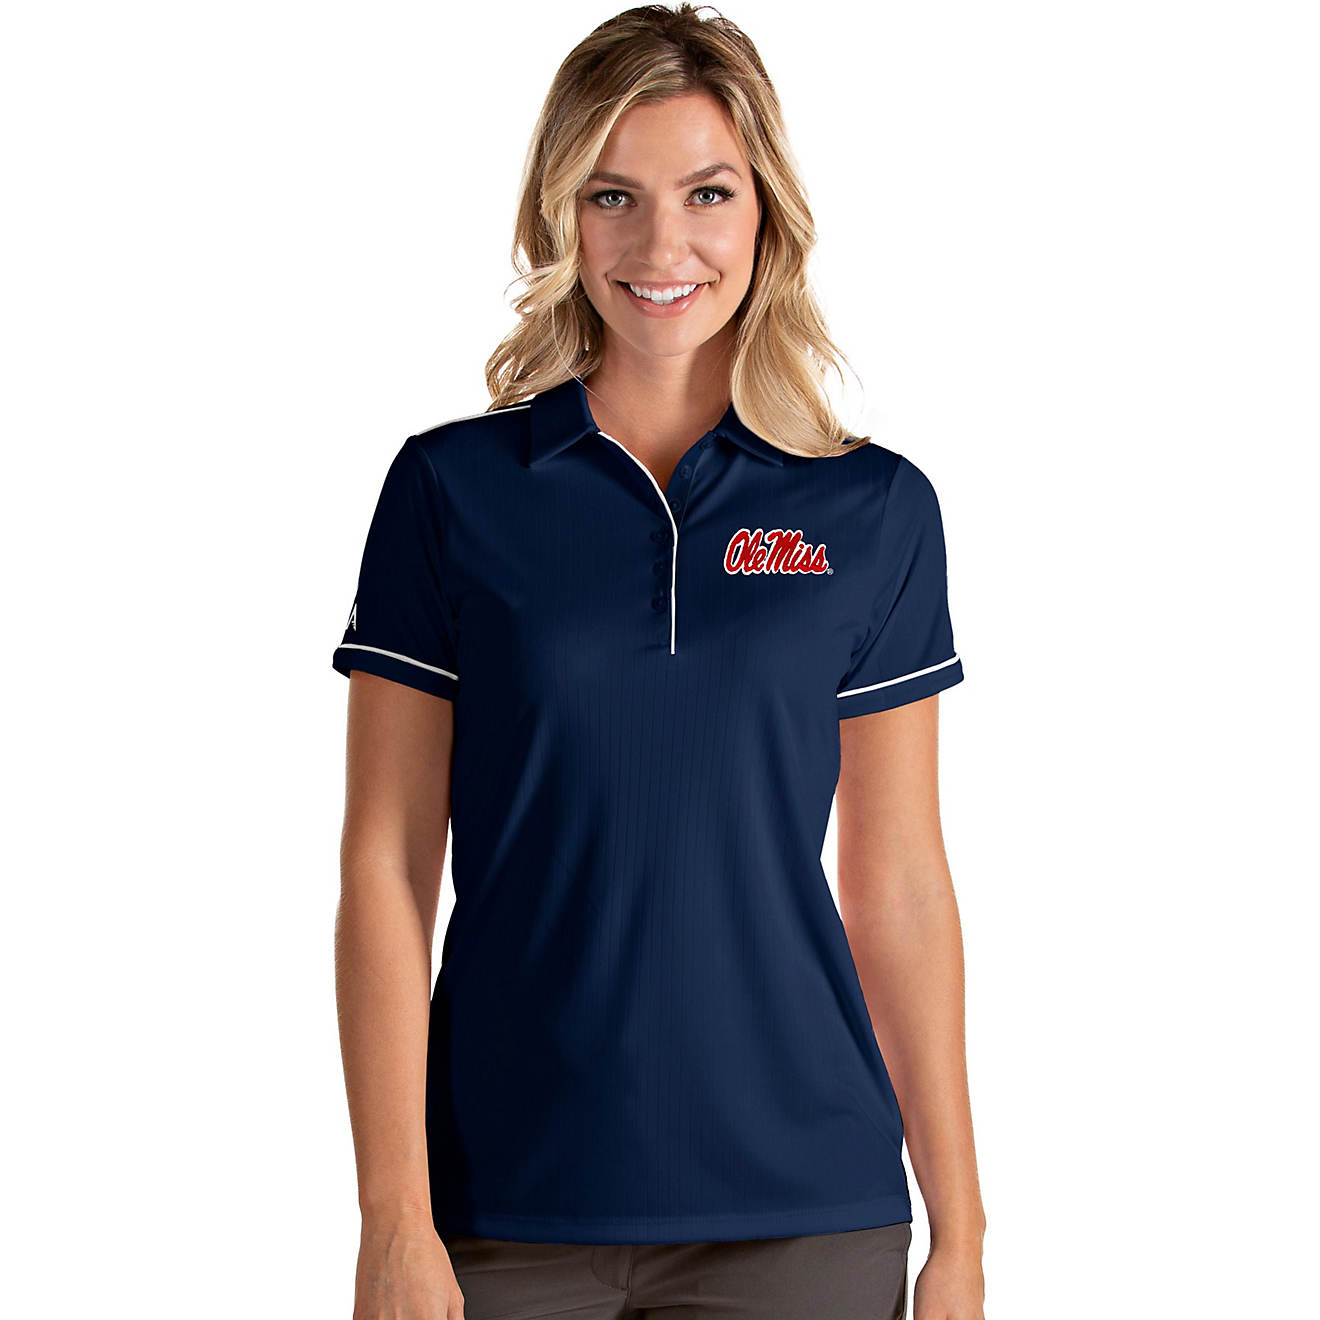 Antigua Women's University of Mississippi Salute Polo Shirt                                                                      - view number 1